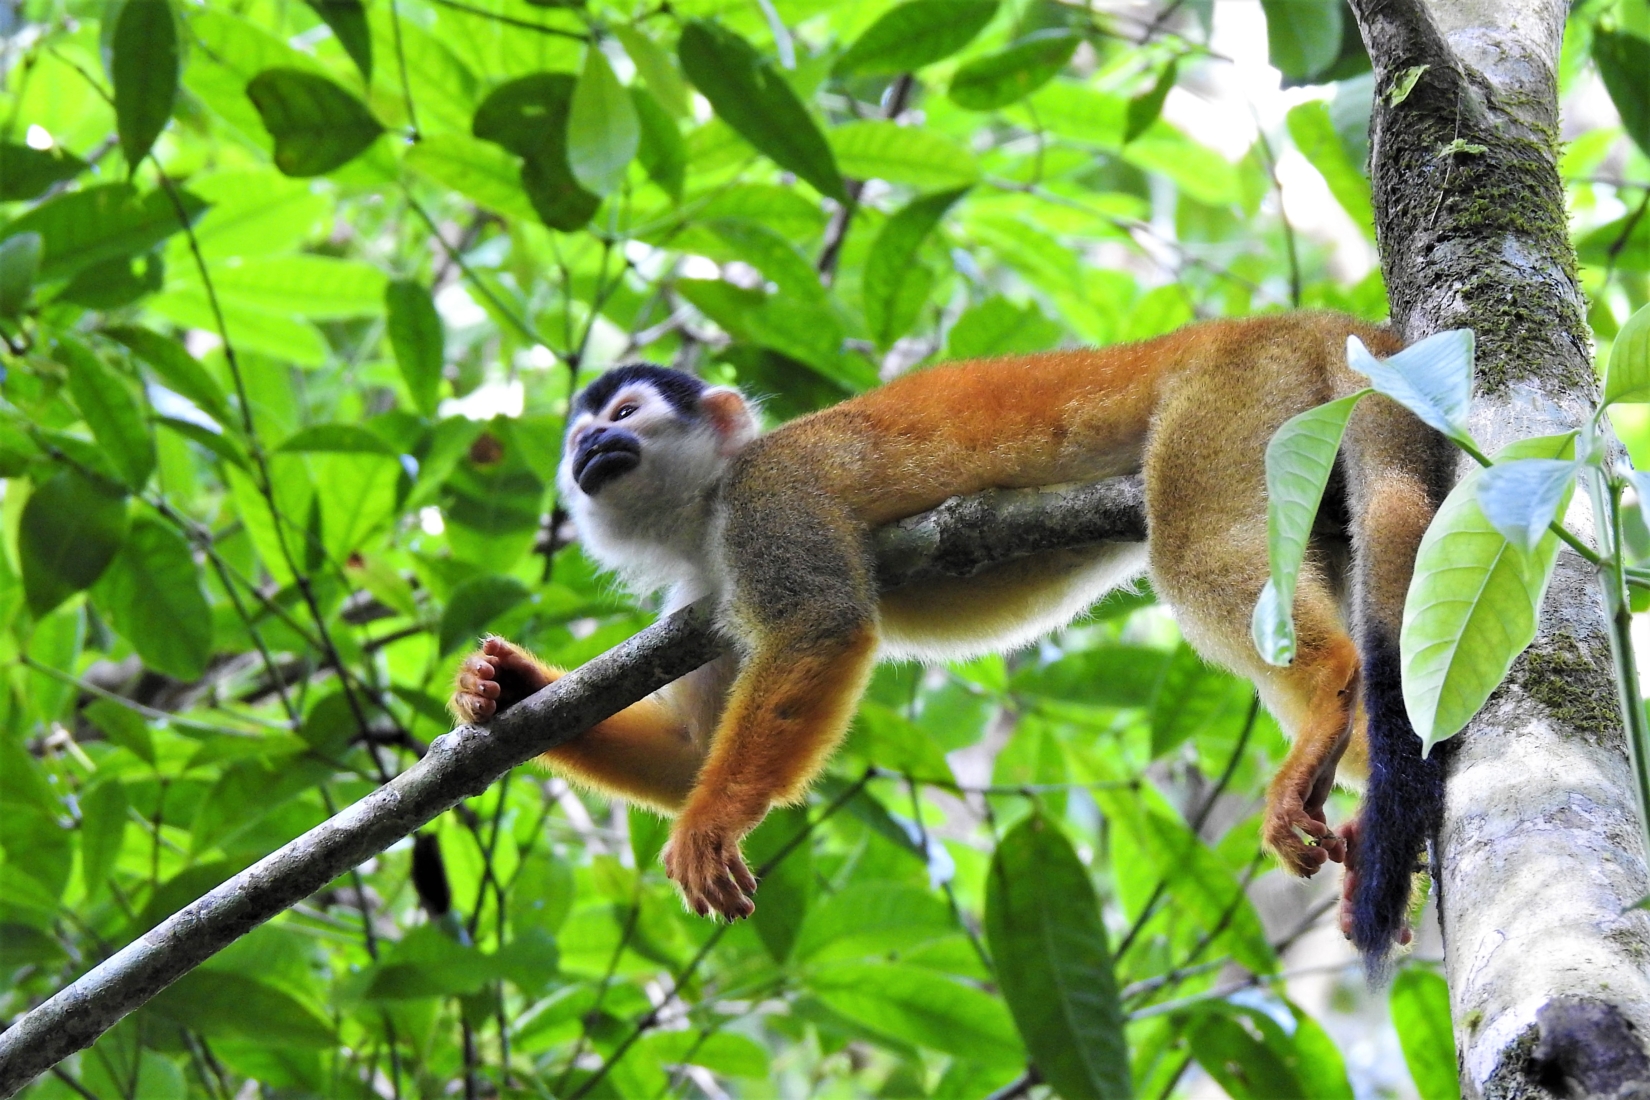 A squirrel monkey resting on a tree branch in sustainable Costa Rica